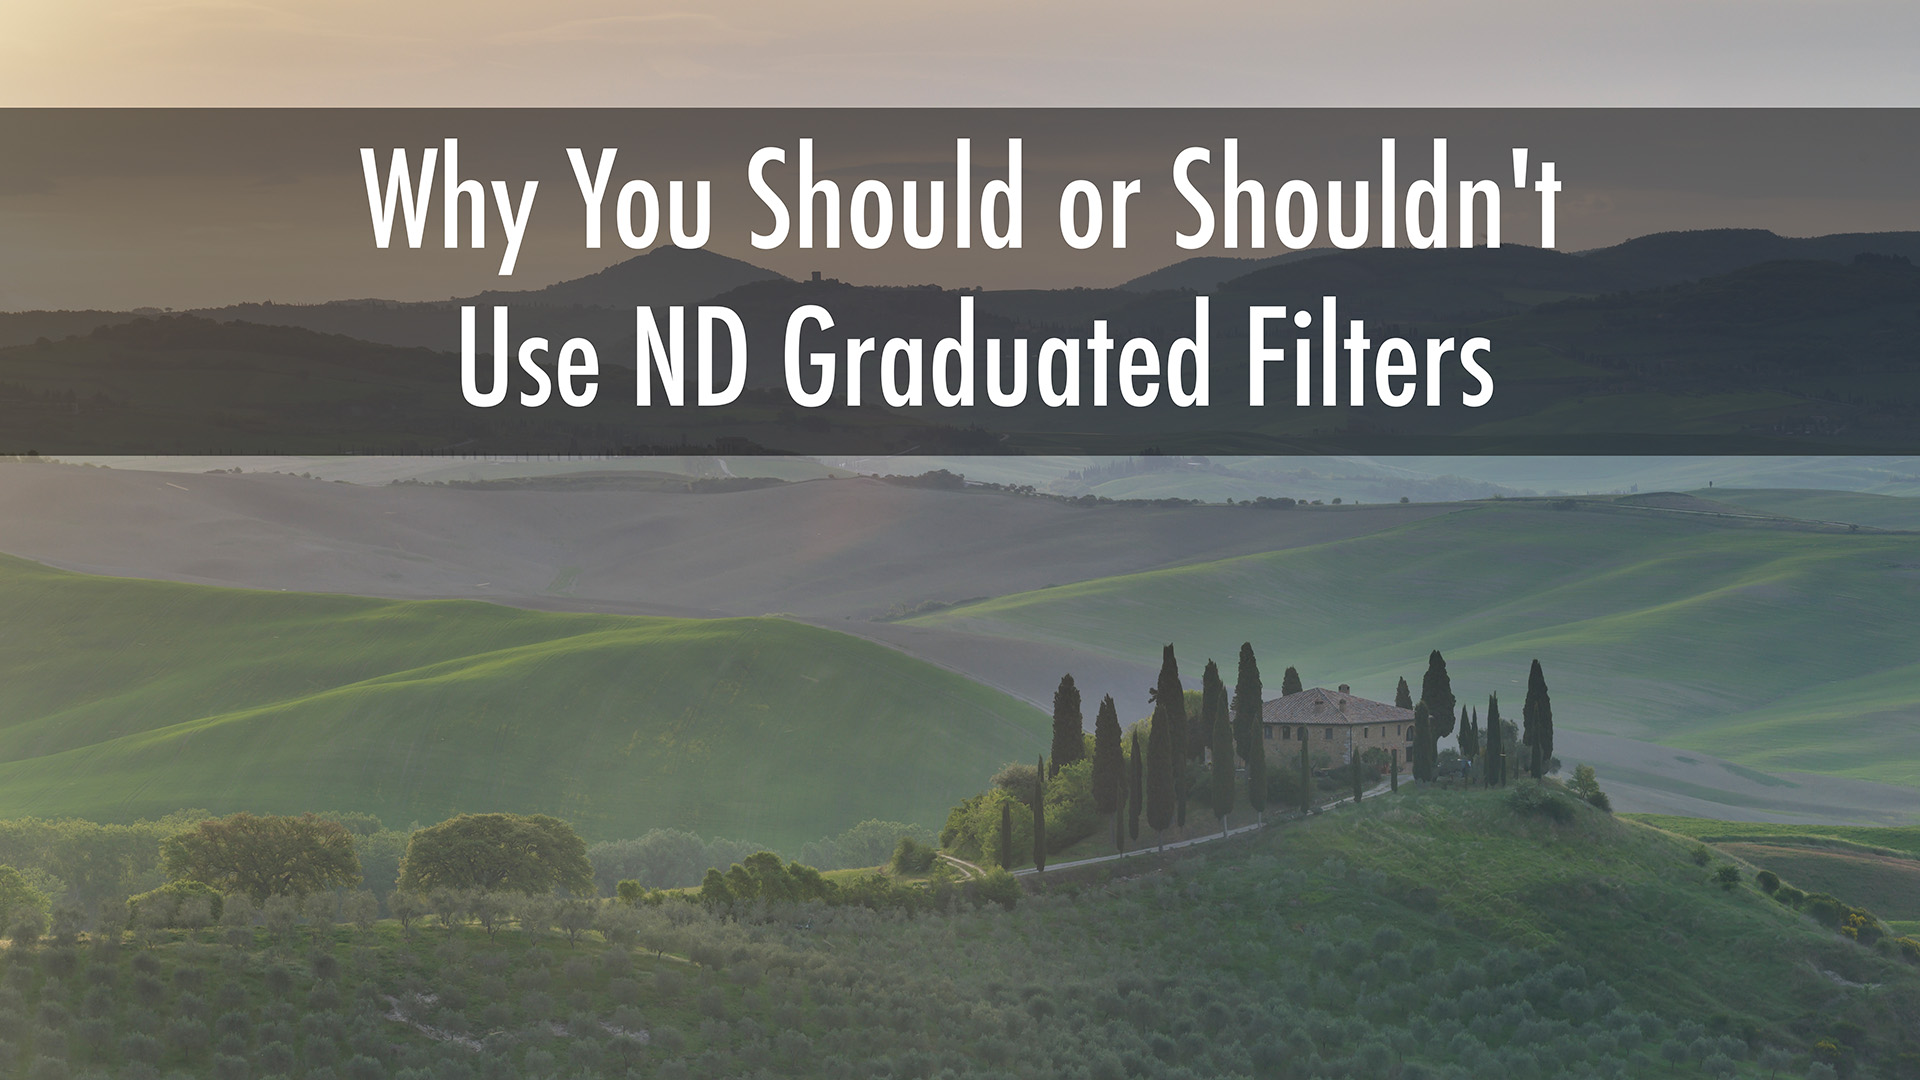 Why you should or shouldn't use ND graduated filters